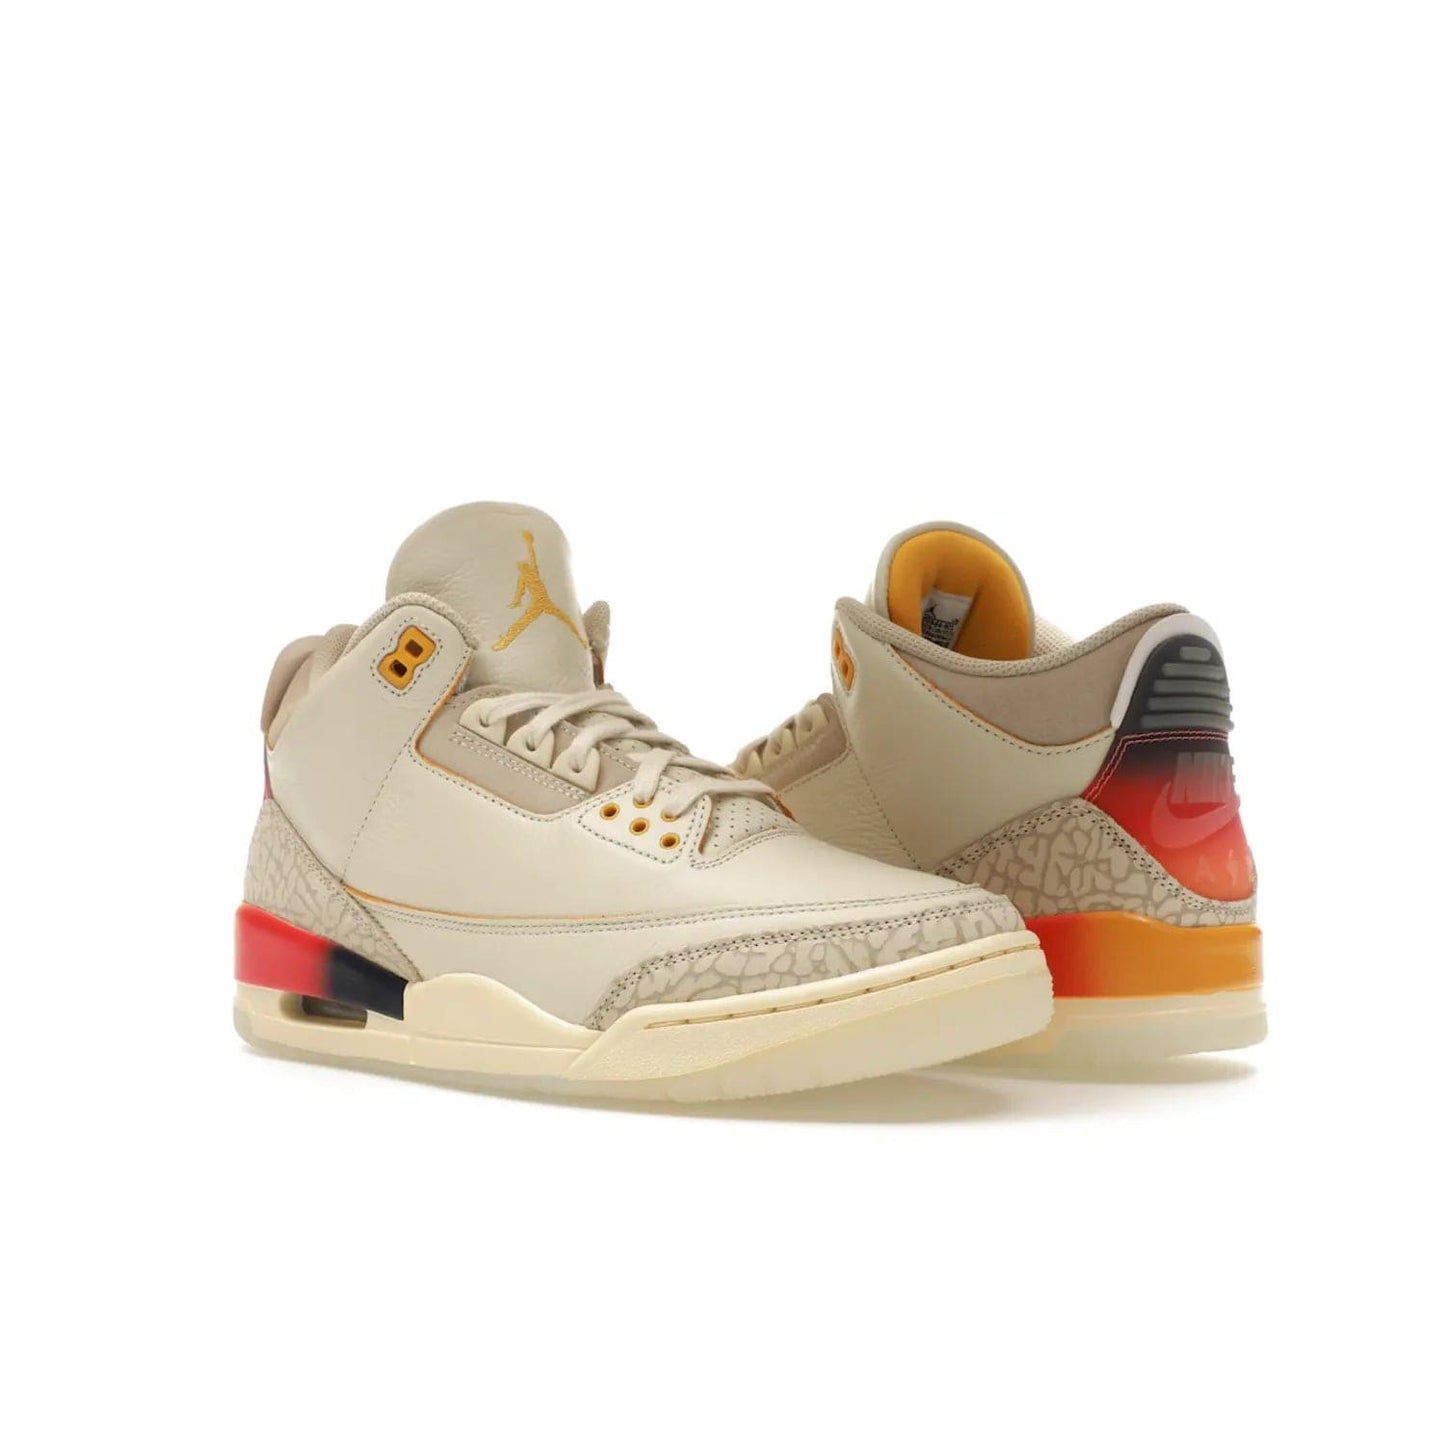 Jordan 3 Retro SP J Balvin Medellín Sunset - Image 5 - Only at www.BallersClubKickz.com - J Balvin x Jordan 3 Retro SP: Celebrate the joy of life with a colorful, homage to the electrifying reggaeton culture and iconic Jordan 3. Limited edition, Sept. 23. $250.